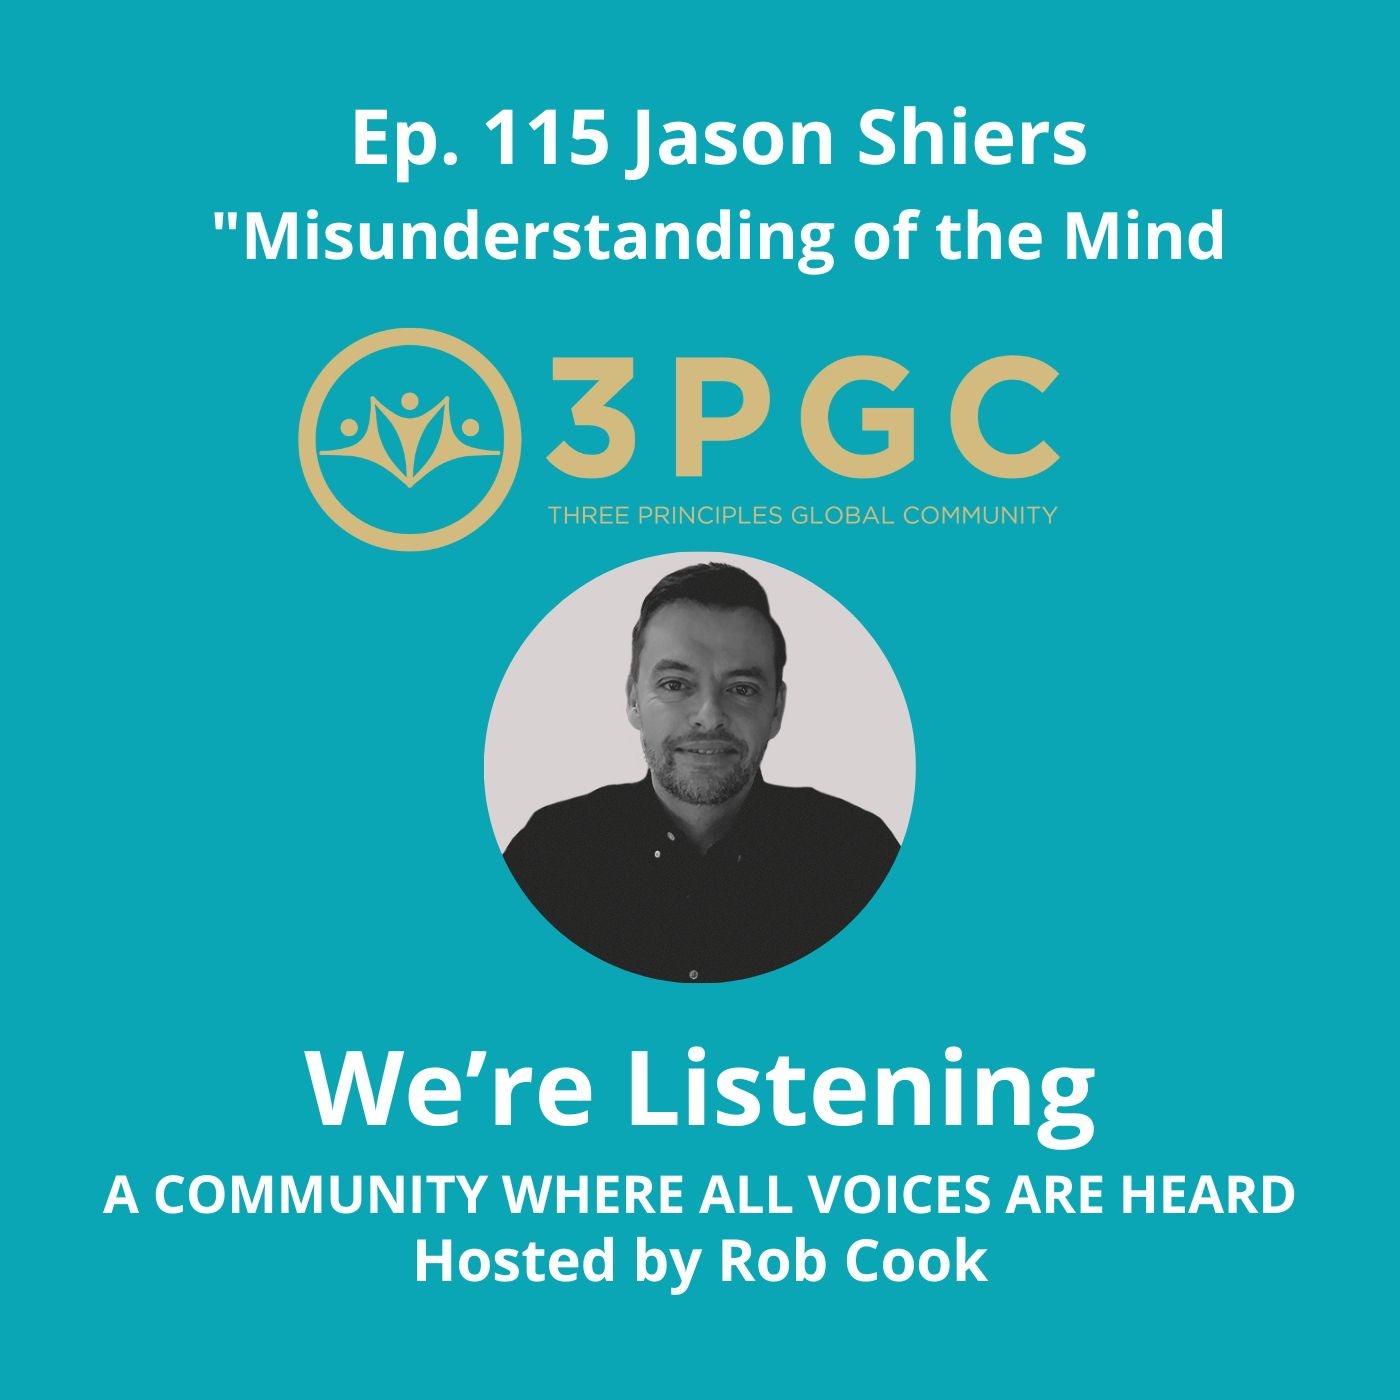 Ep. 115 Jason Shiers “The Misunderstanding of the Mind”